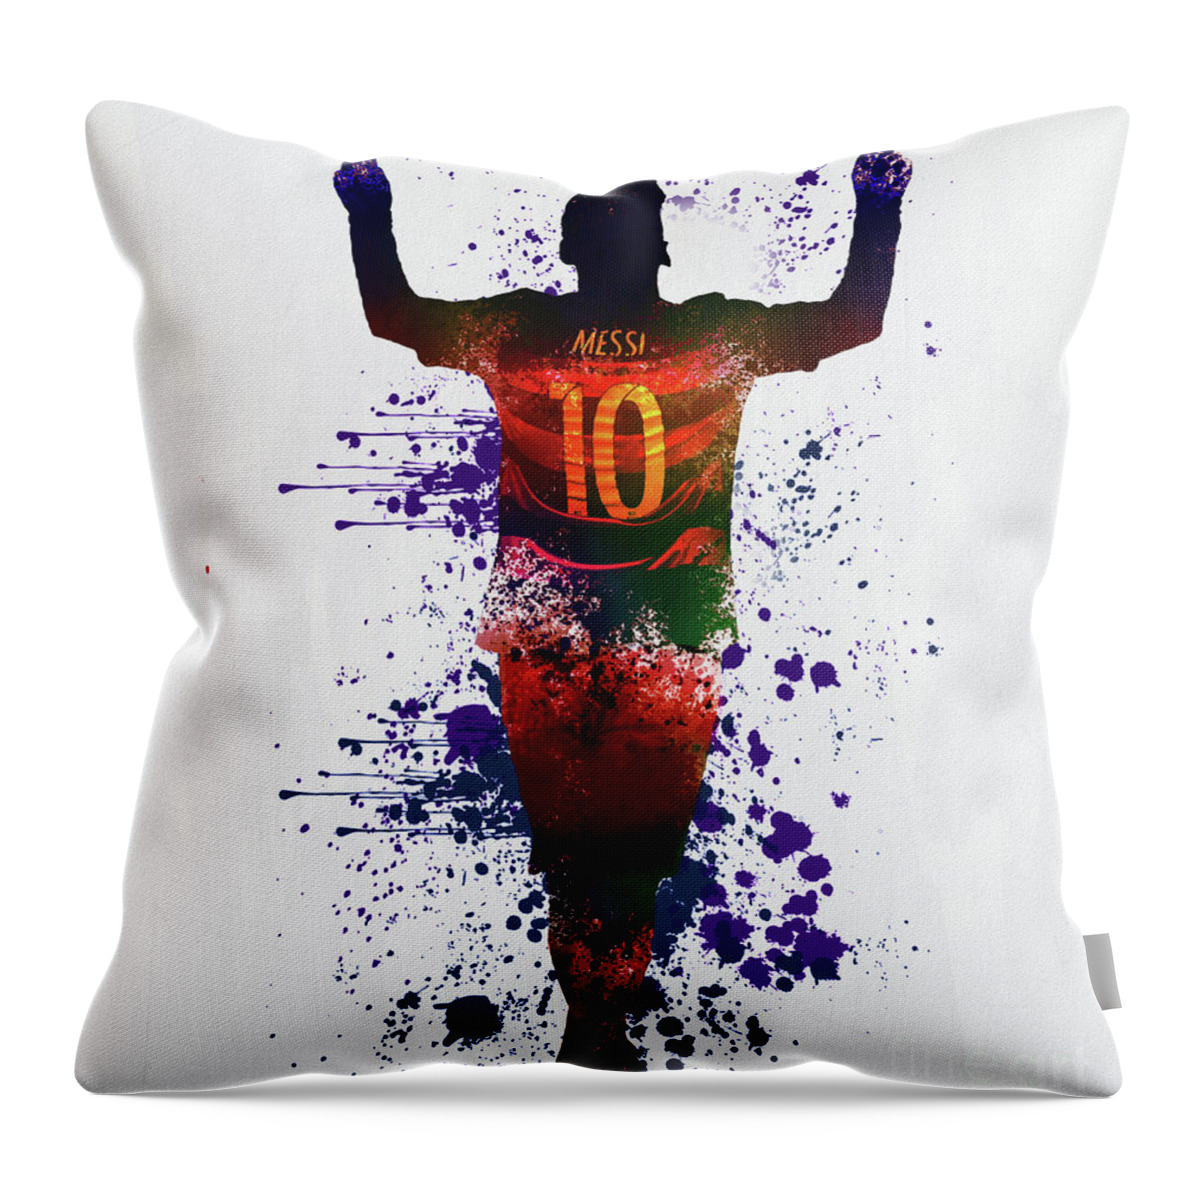 Messi Throw Pillow featuring the painting Messi barcelona by Gull G